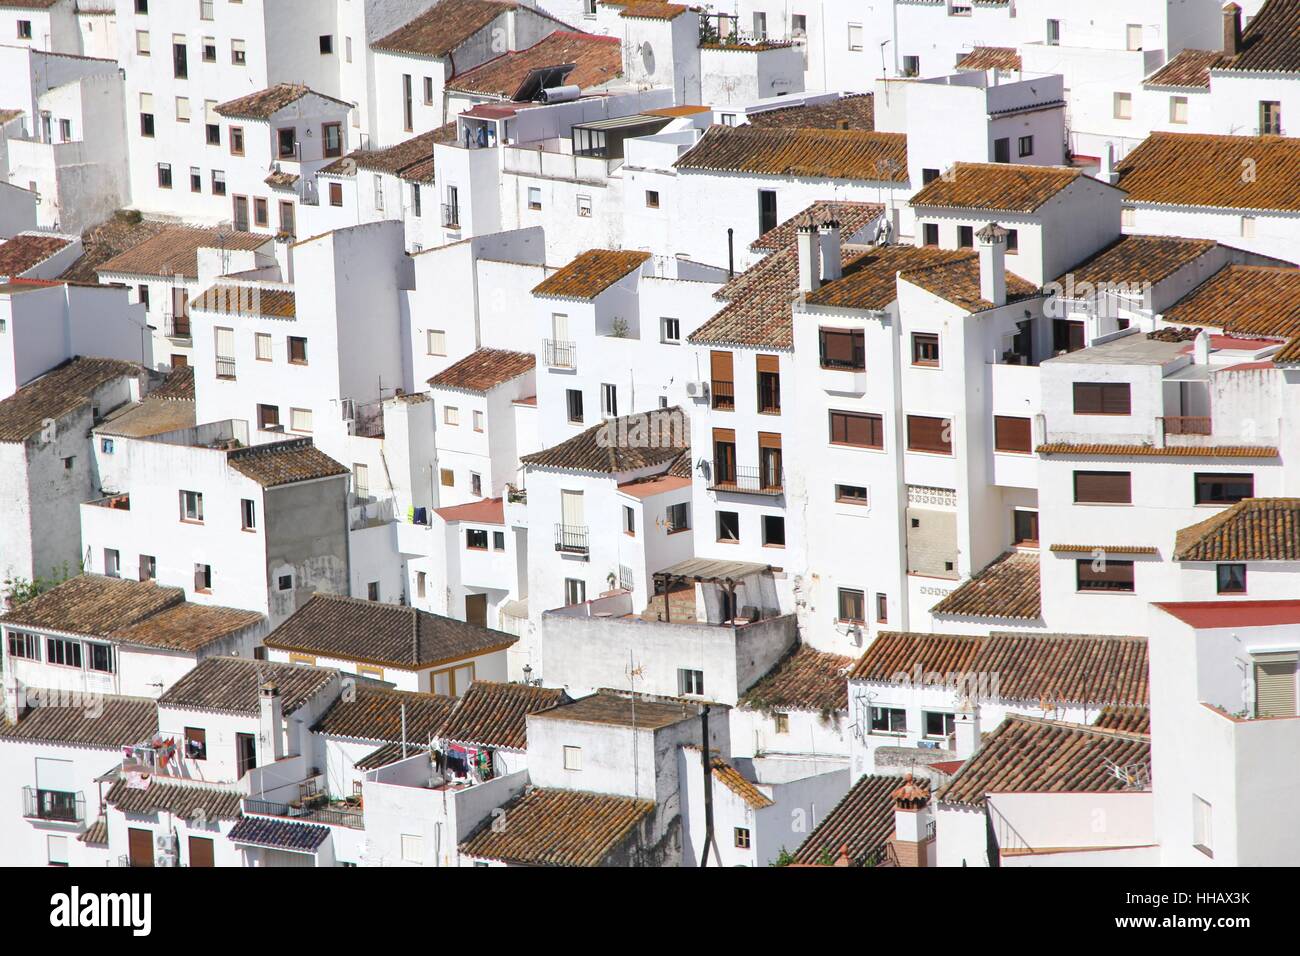 andalusian village Stock Photo